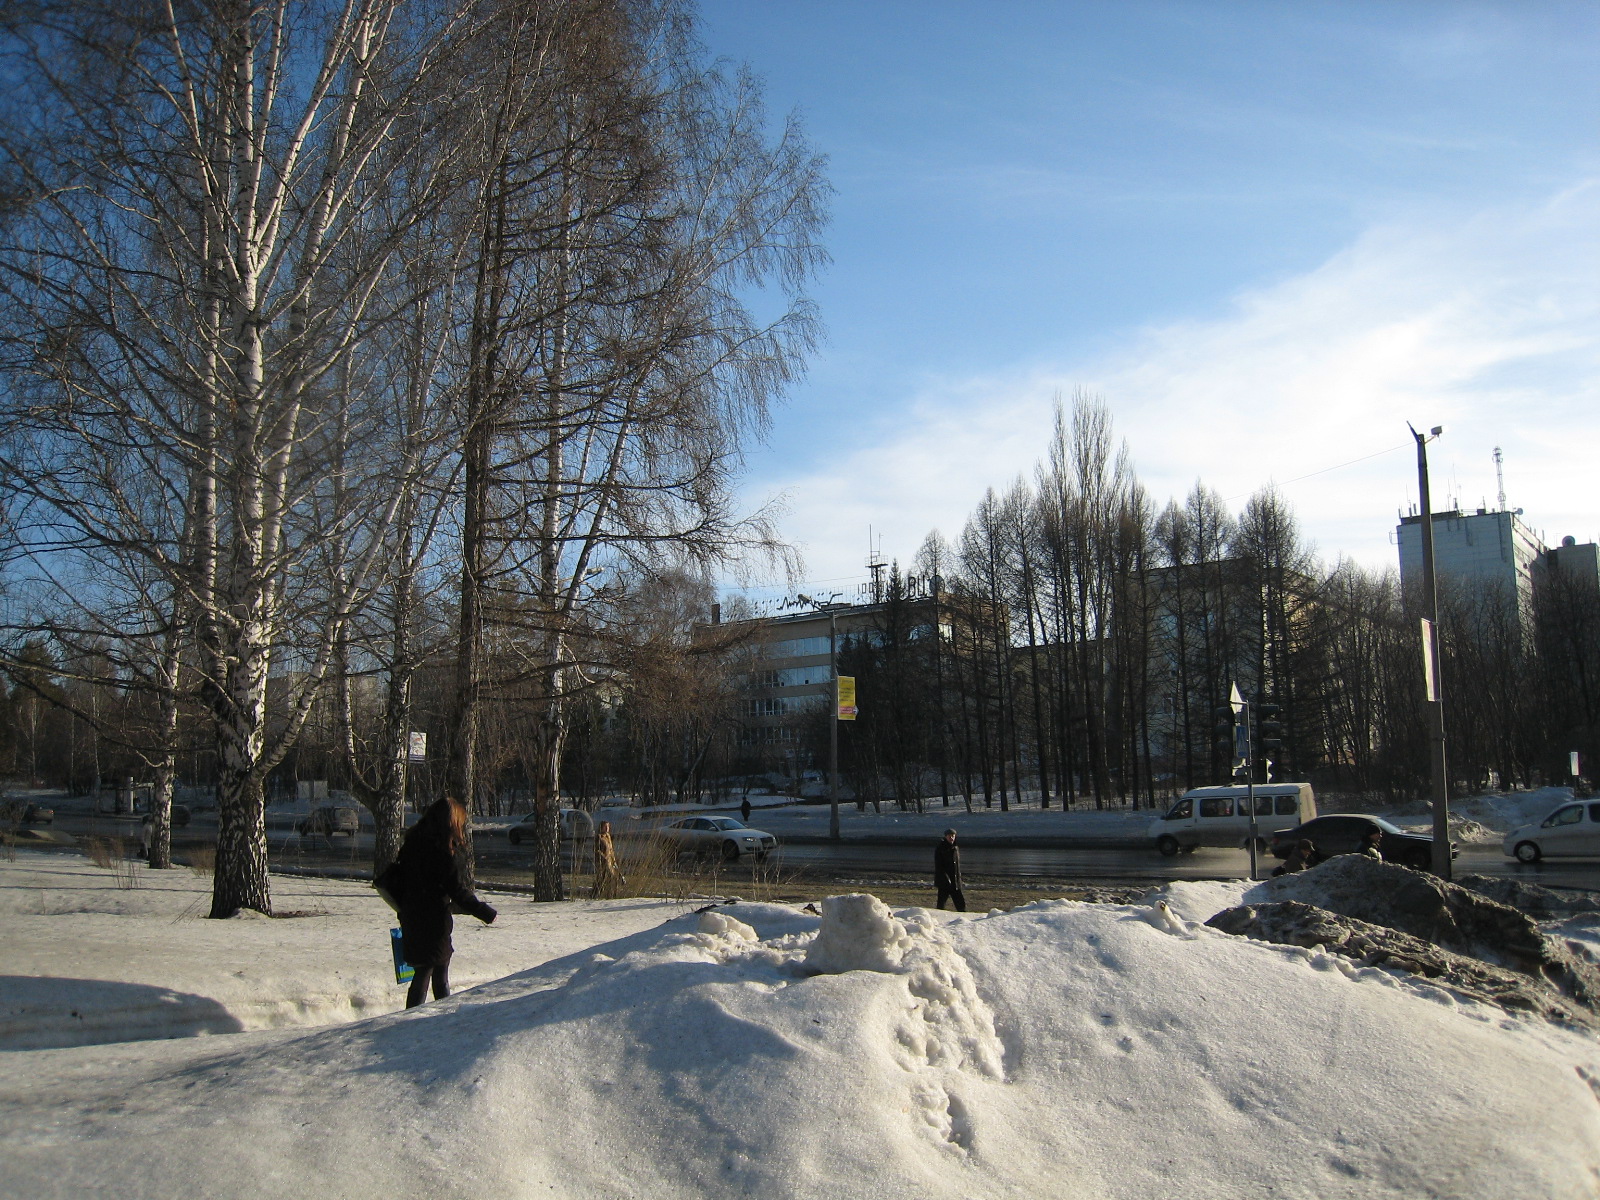 Acad. Lavrentjev av. at the end of March